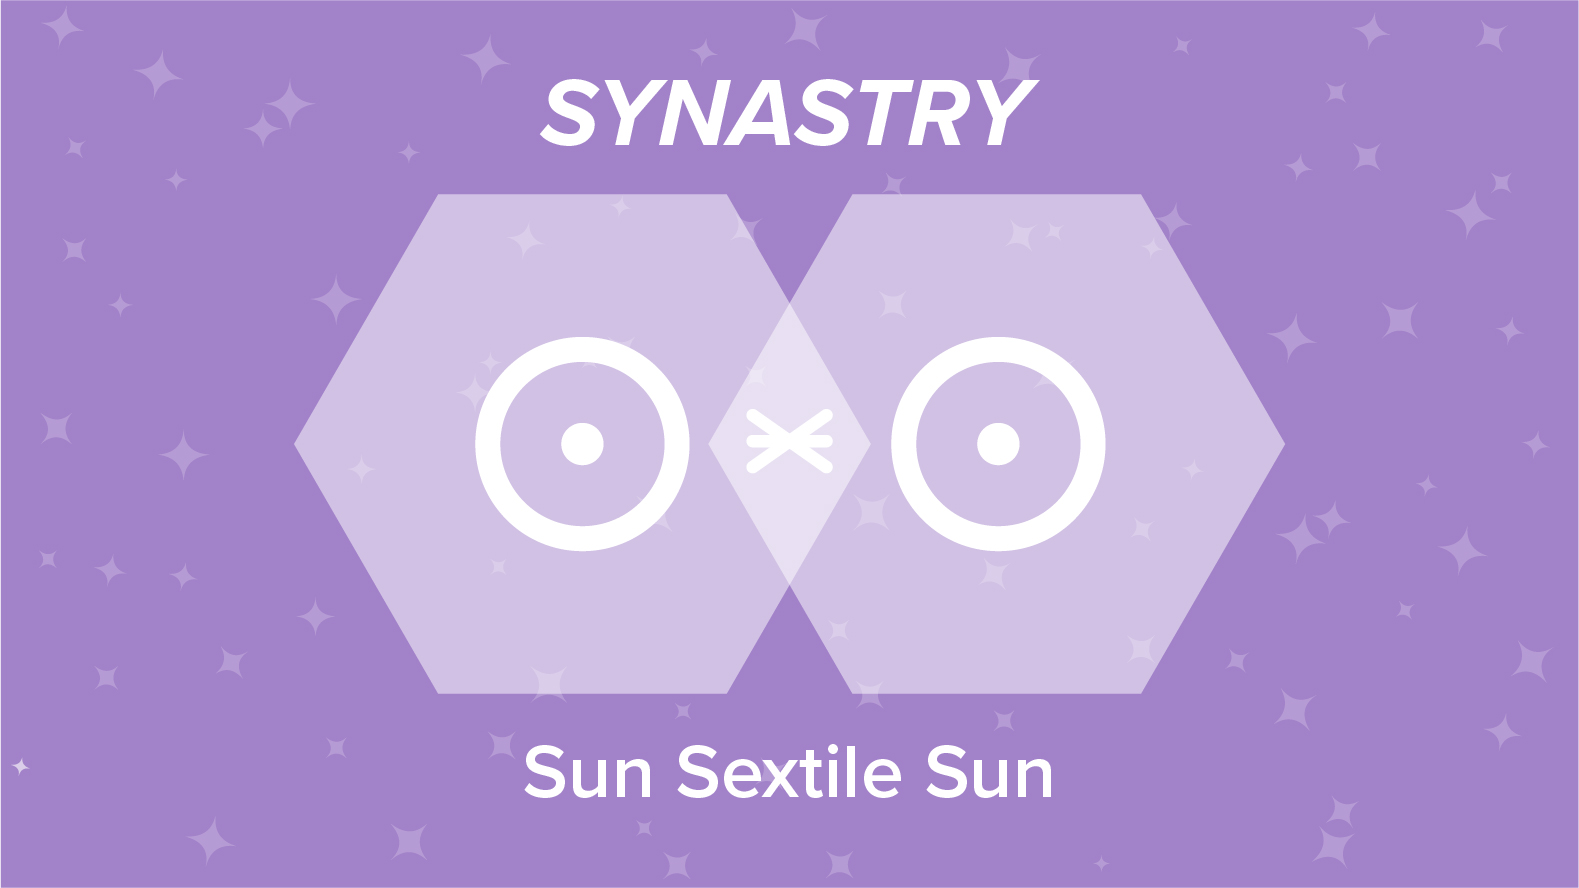 Sun Sextile Sun Synastry: Relationships and Friendships Explained